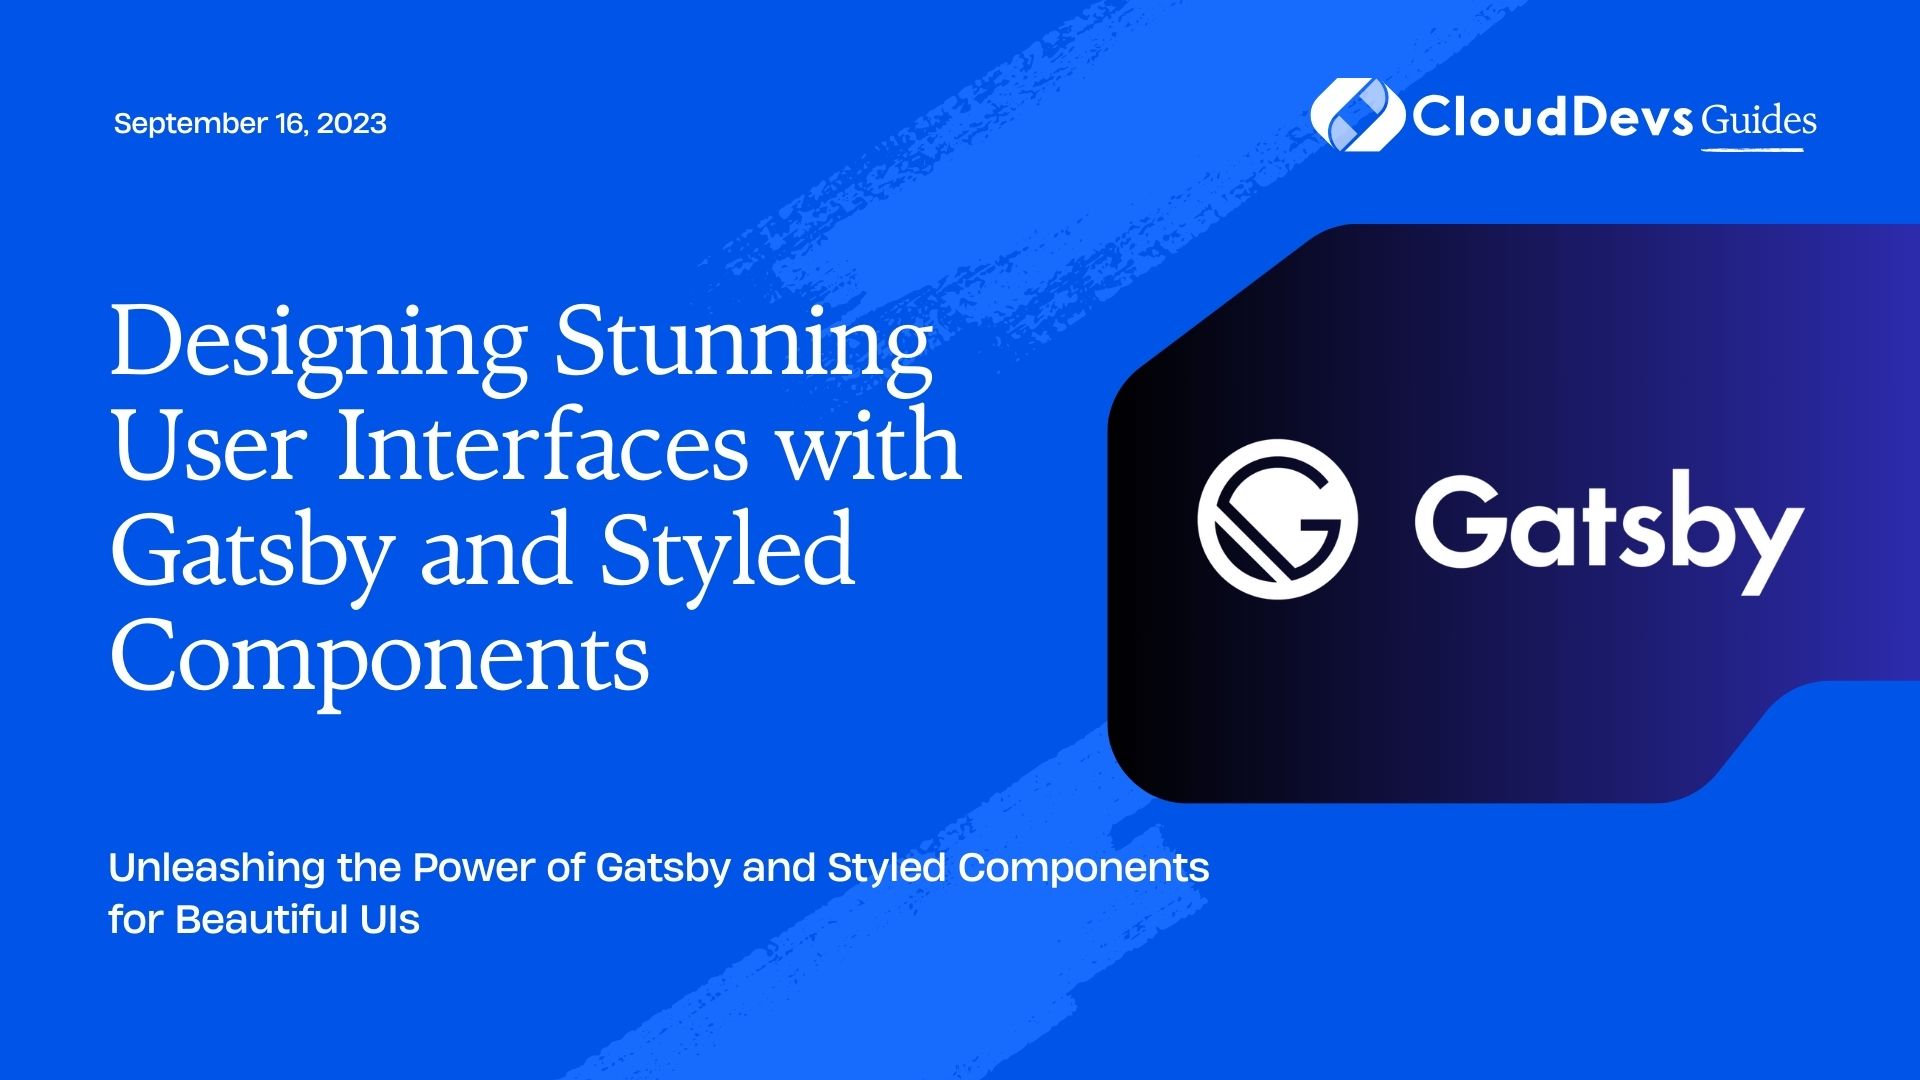 Designing Stunning User Interfaces with Gatsby and Styled Components